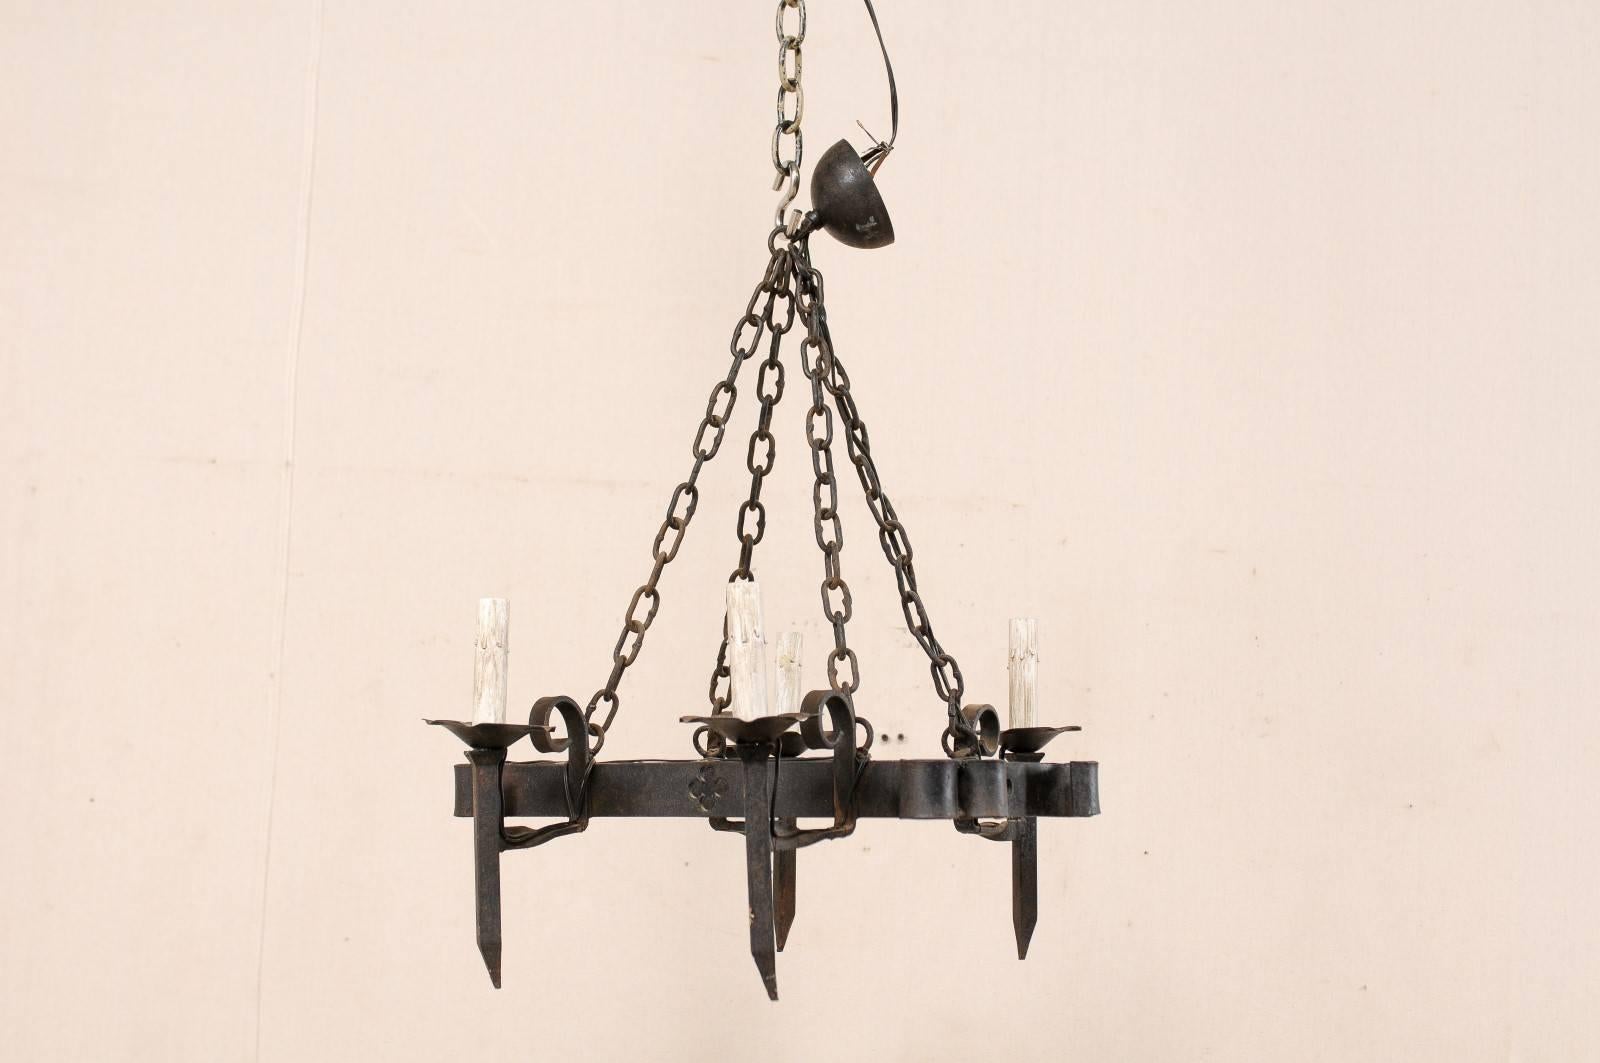 A French four-light forged iron chandelier with quatrefoil pierced motif. This mid-20th century French black iron chandelier has an open, center body adorn with pierced clovers, and two torch-light arms at opposing sides. The four torch lights